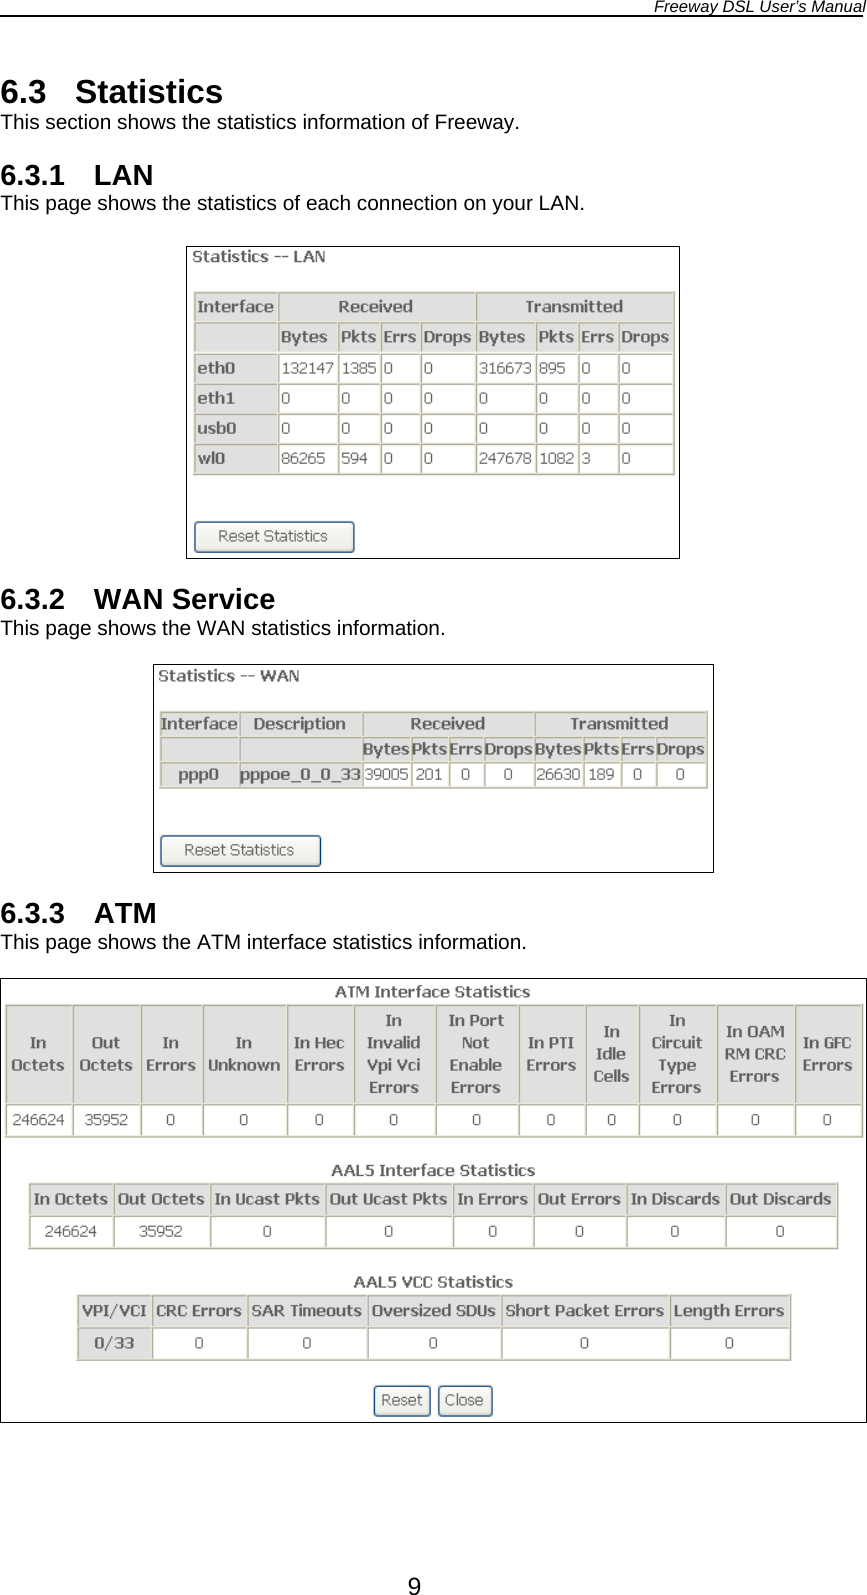 Freeway DSL User’s Manual  9 6.3 Statistics This section shows the statistics information of Freeway.  6.3.1 LAN This page shows the statistics of each connection on your LAN.    6.3.2 WAN Service This page shows the WAN statistics information.    6.3.3 ATM This page shows the ATM interface statistics information.    